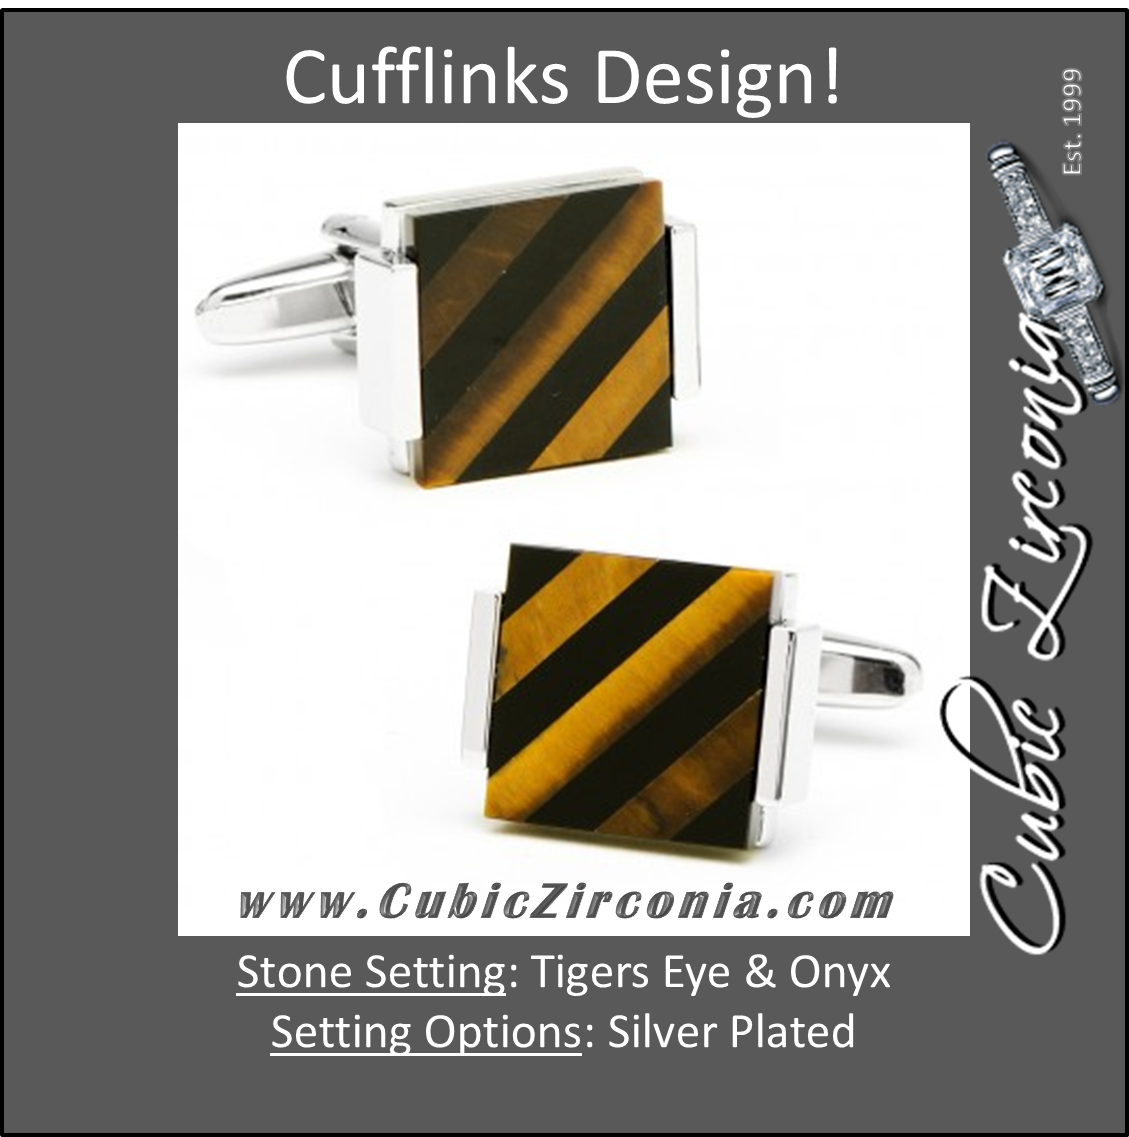 Men’s Cufflinks- Silver Plated with Floating Tigers Eye & Onyx